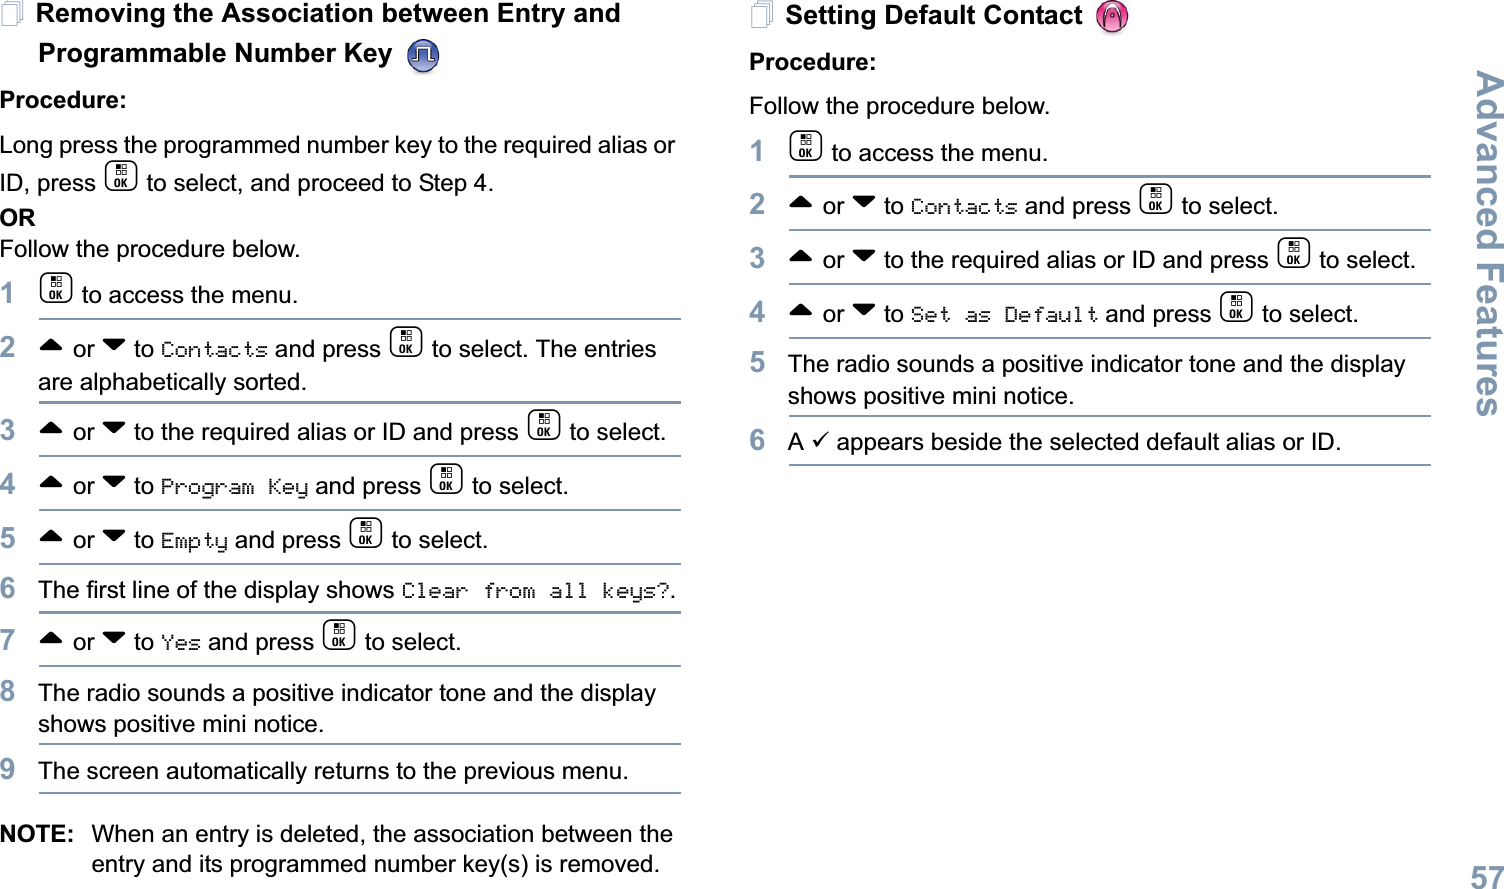 Advanced FeaturesEnglish57Removing the Association between Entry and Programmable Number Key Procedure:Long press the programmed number key to the required alias or ID, press c to select, and proceed to Step 4.ORFollow the procedure below.1c to access the menu.2^ or v to Contacts and press c to select. The entries are alphabetically sorted.3^ or v to the required alias or ID and press c to select.4^ or v to Program Key and press c to select.5^ or v to Empty and press c to select.6The first line of the display shows Clear from all keys?.7^ or v to Yes and press c to select.8The radio sounds a positive indicator tone and the display shows positive mini notice.9The screen automatically returns to the previous menu.NOTE: When an entry is deleted, the association between the entry and its programmed number key(s) is removed.Setting Default Contact Procedure:Follow the procedure below.1c to access the menu.2^ or v to Contacts and press c to select.3^ or v to the required alias or ID and press c to select.4^ or v to Set as Default and press c to select.5The radio sounds a positive indicator tone and the display shows positive mini notice.6A 9 appears beside the selected default alias or ID.